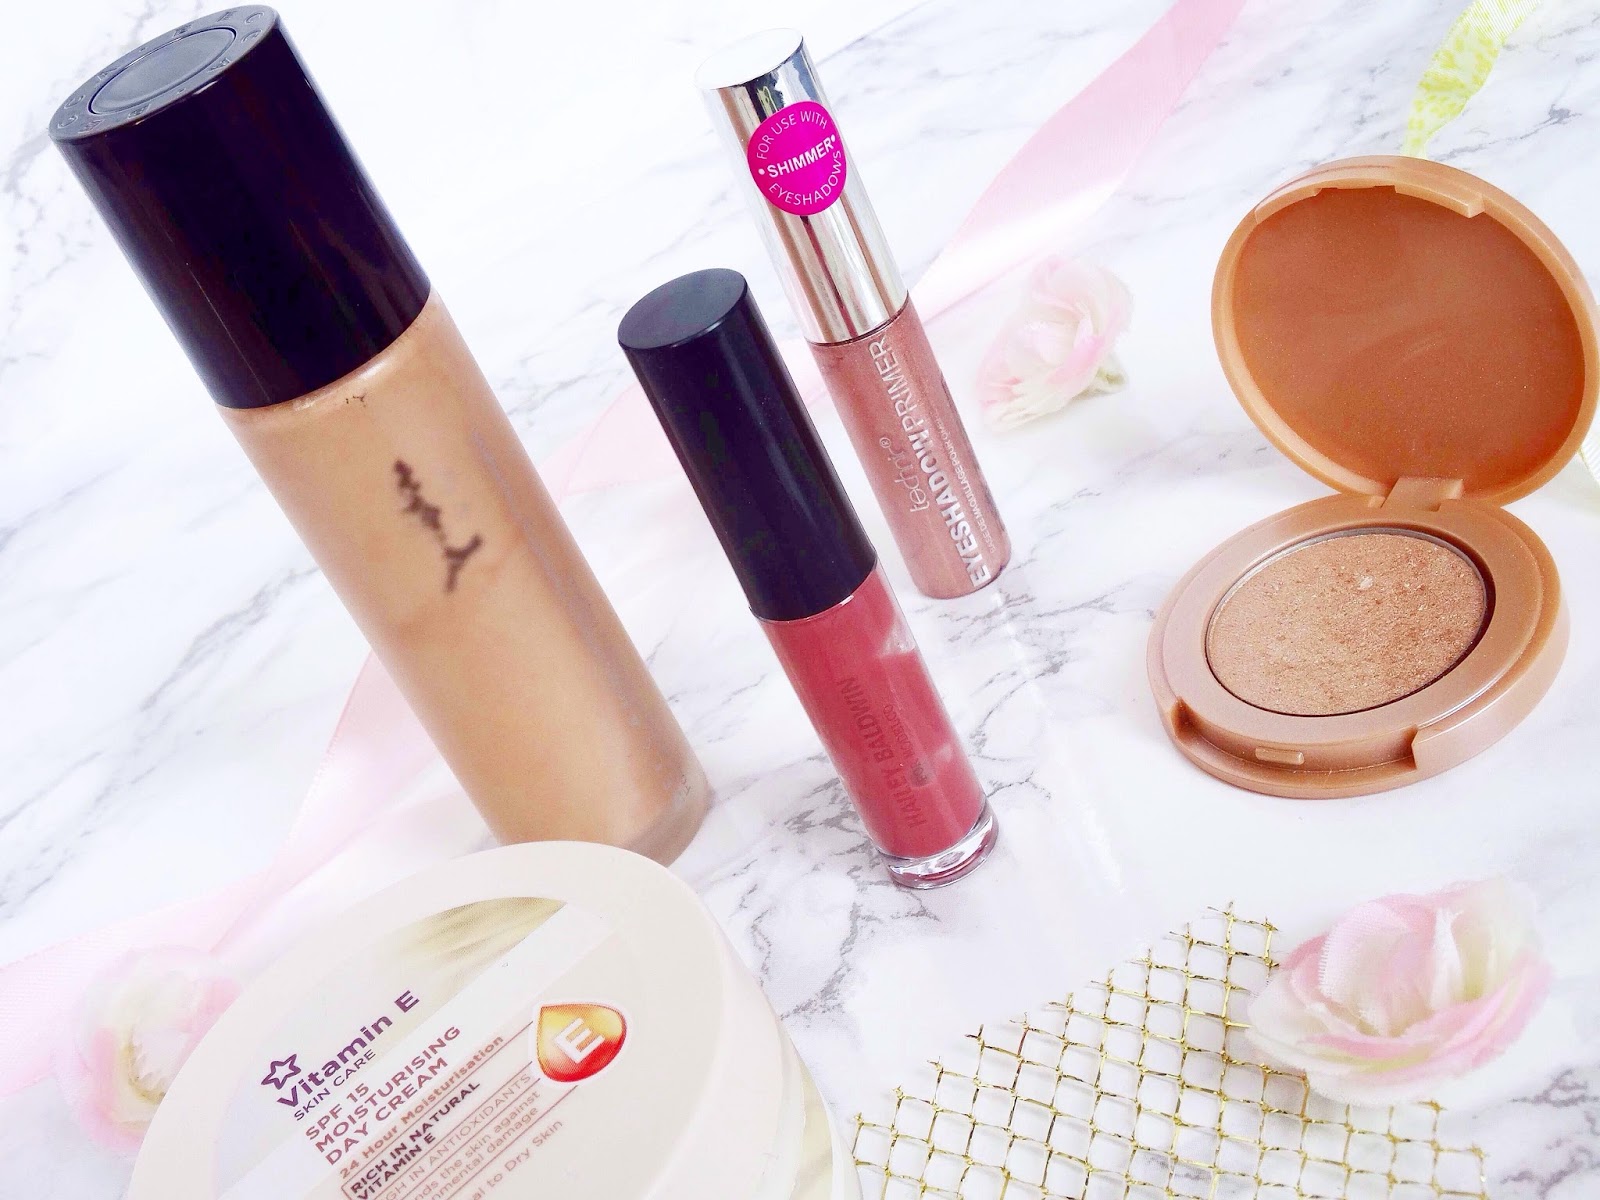 5 Products I'm Loving At The Moment